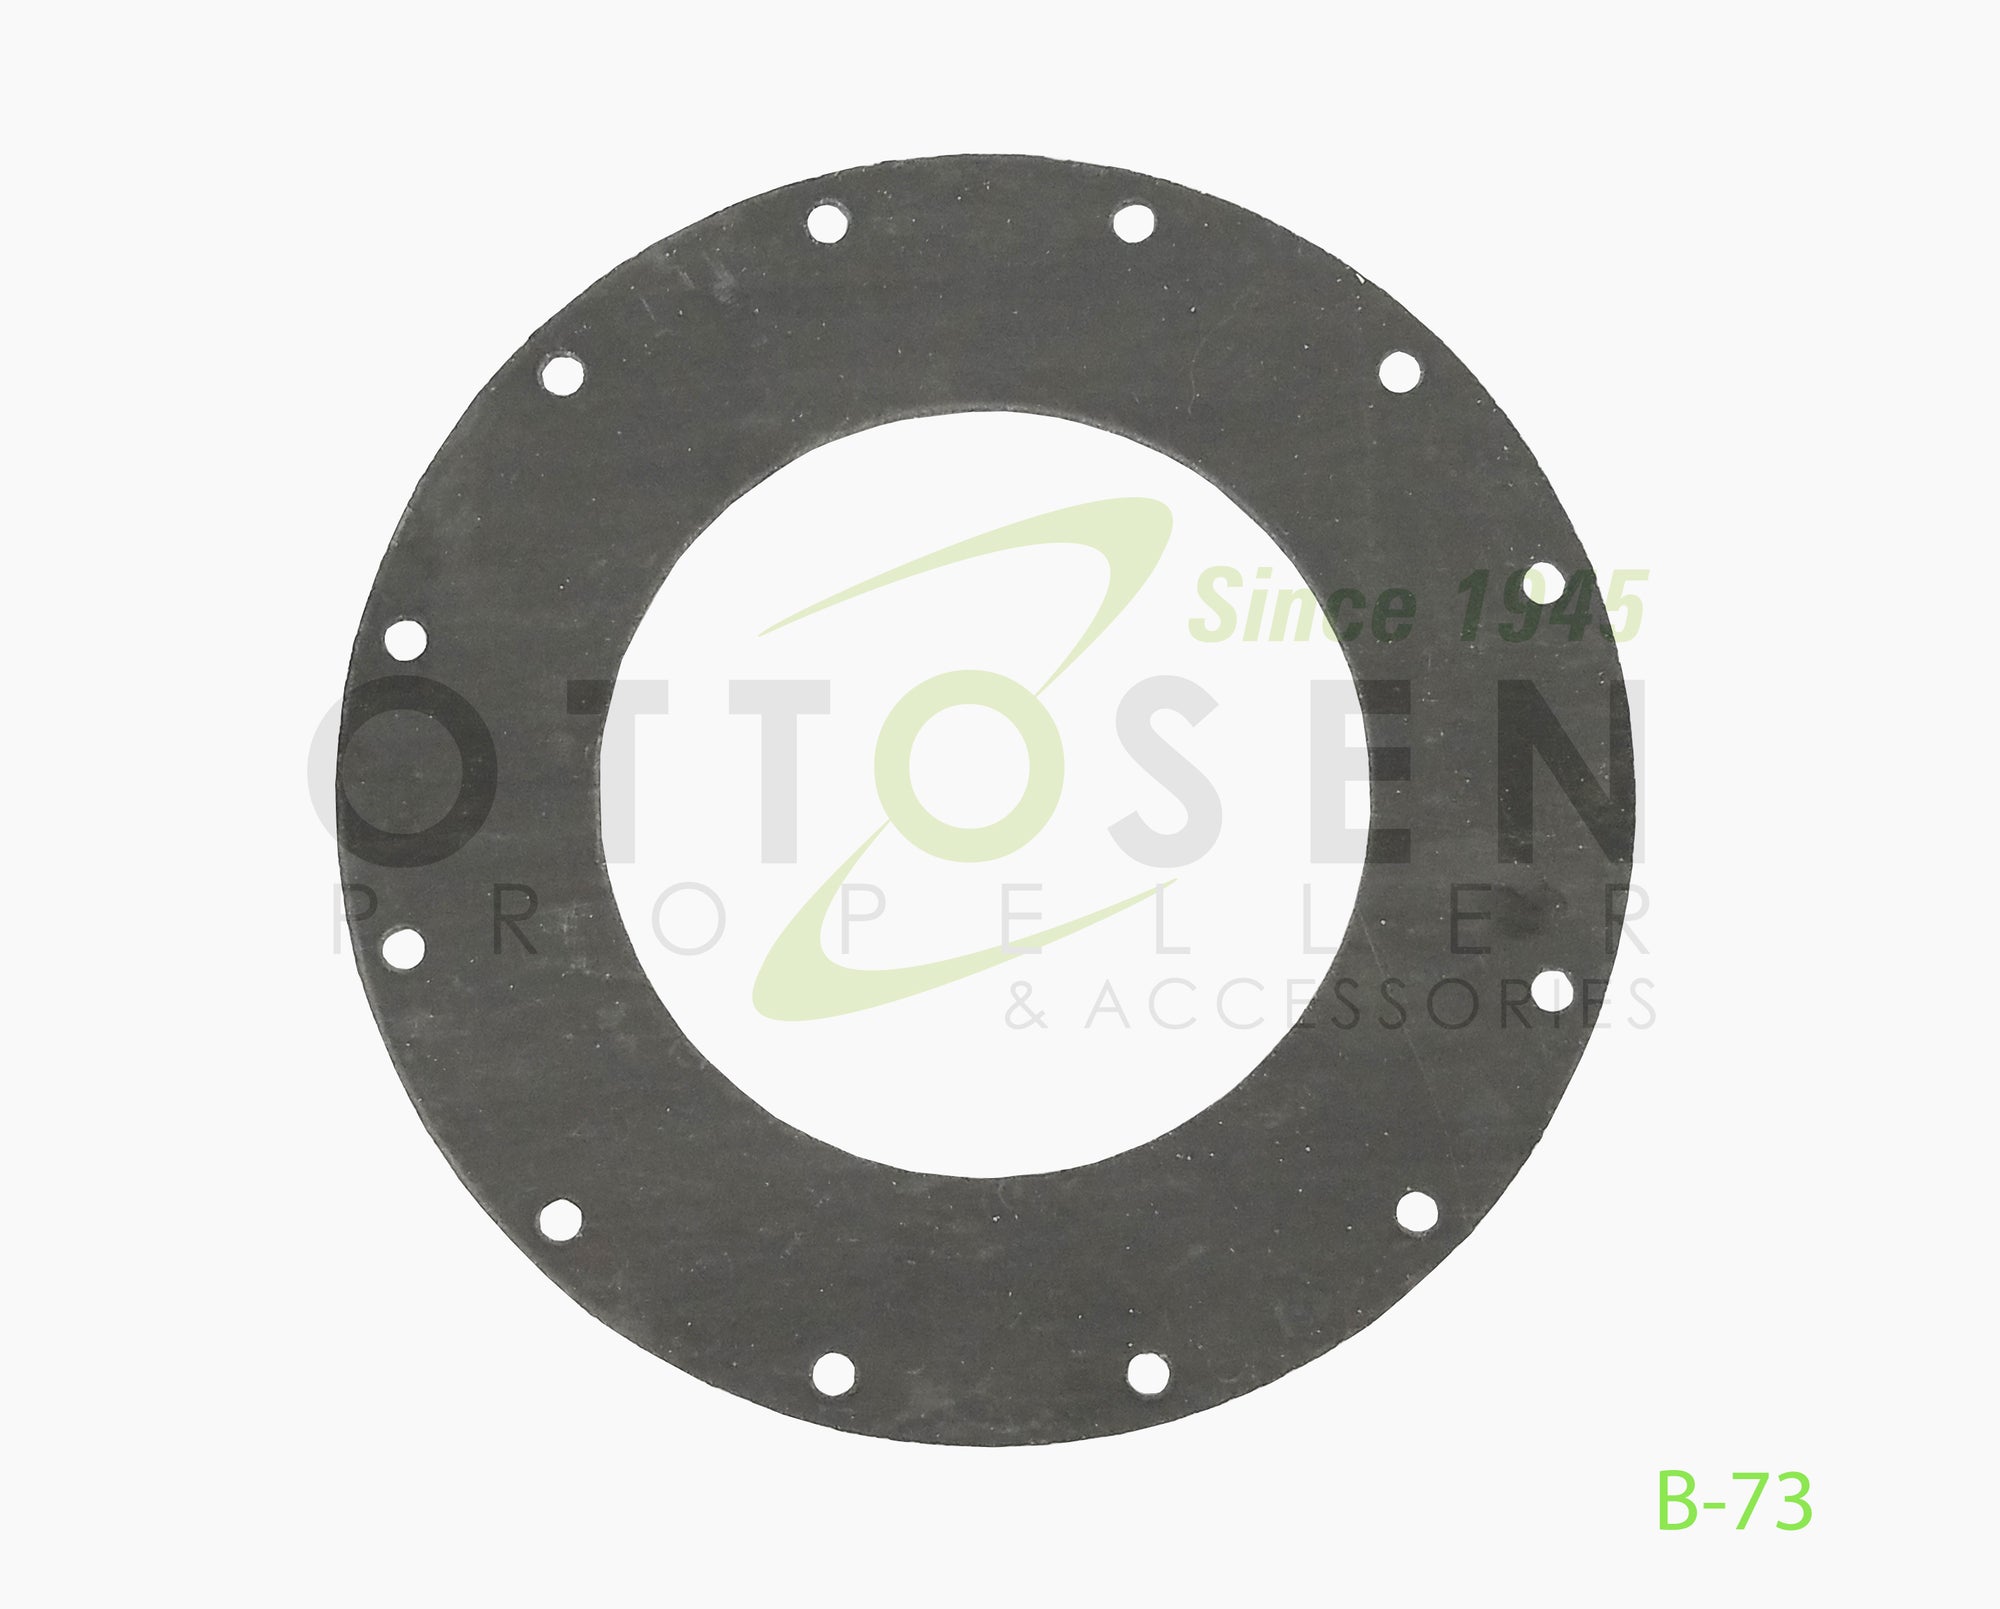 B-73-HARTZELL-PROPELER-GASKET-COVER-PLATE-PICTURE-1